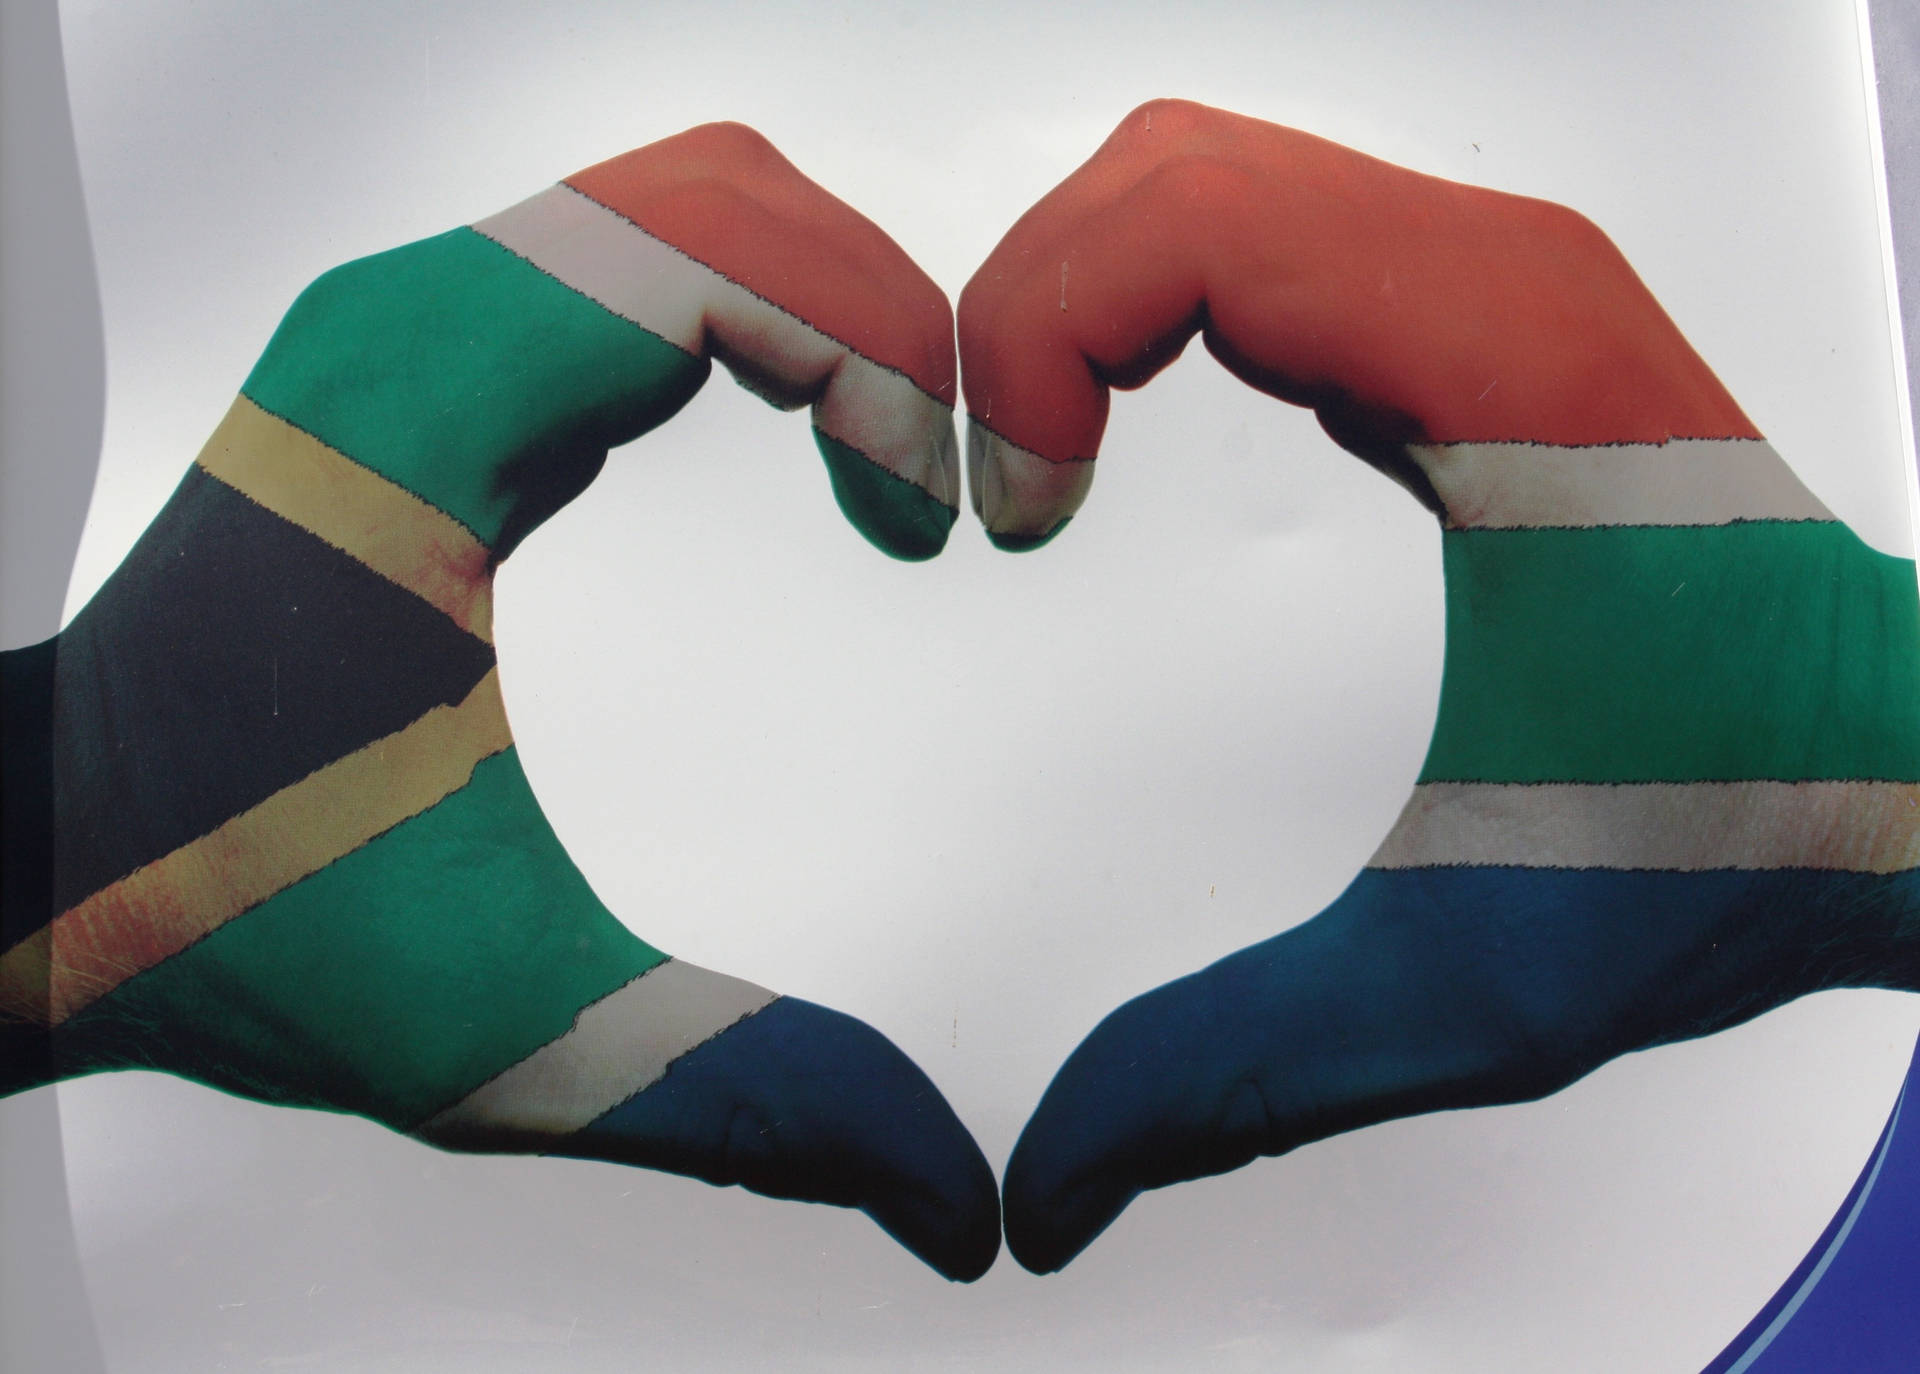 Expressing Love Through Hand Heart Shape Against South African Landscape Wallpaper